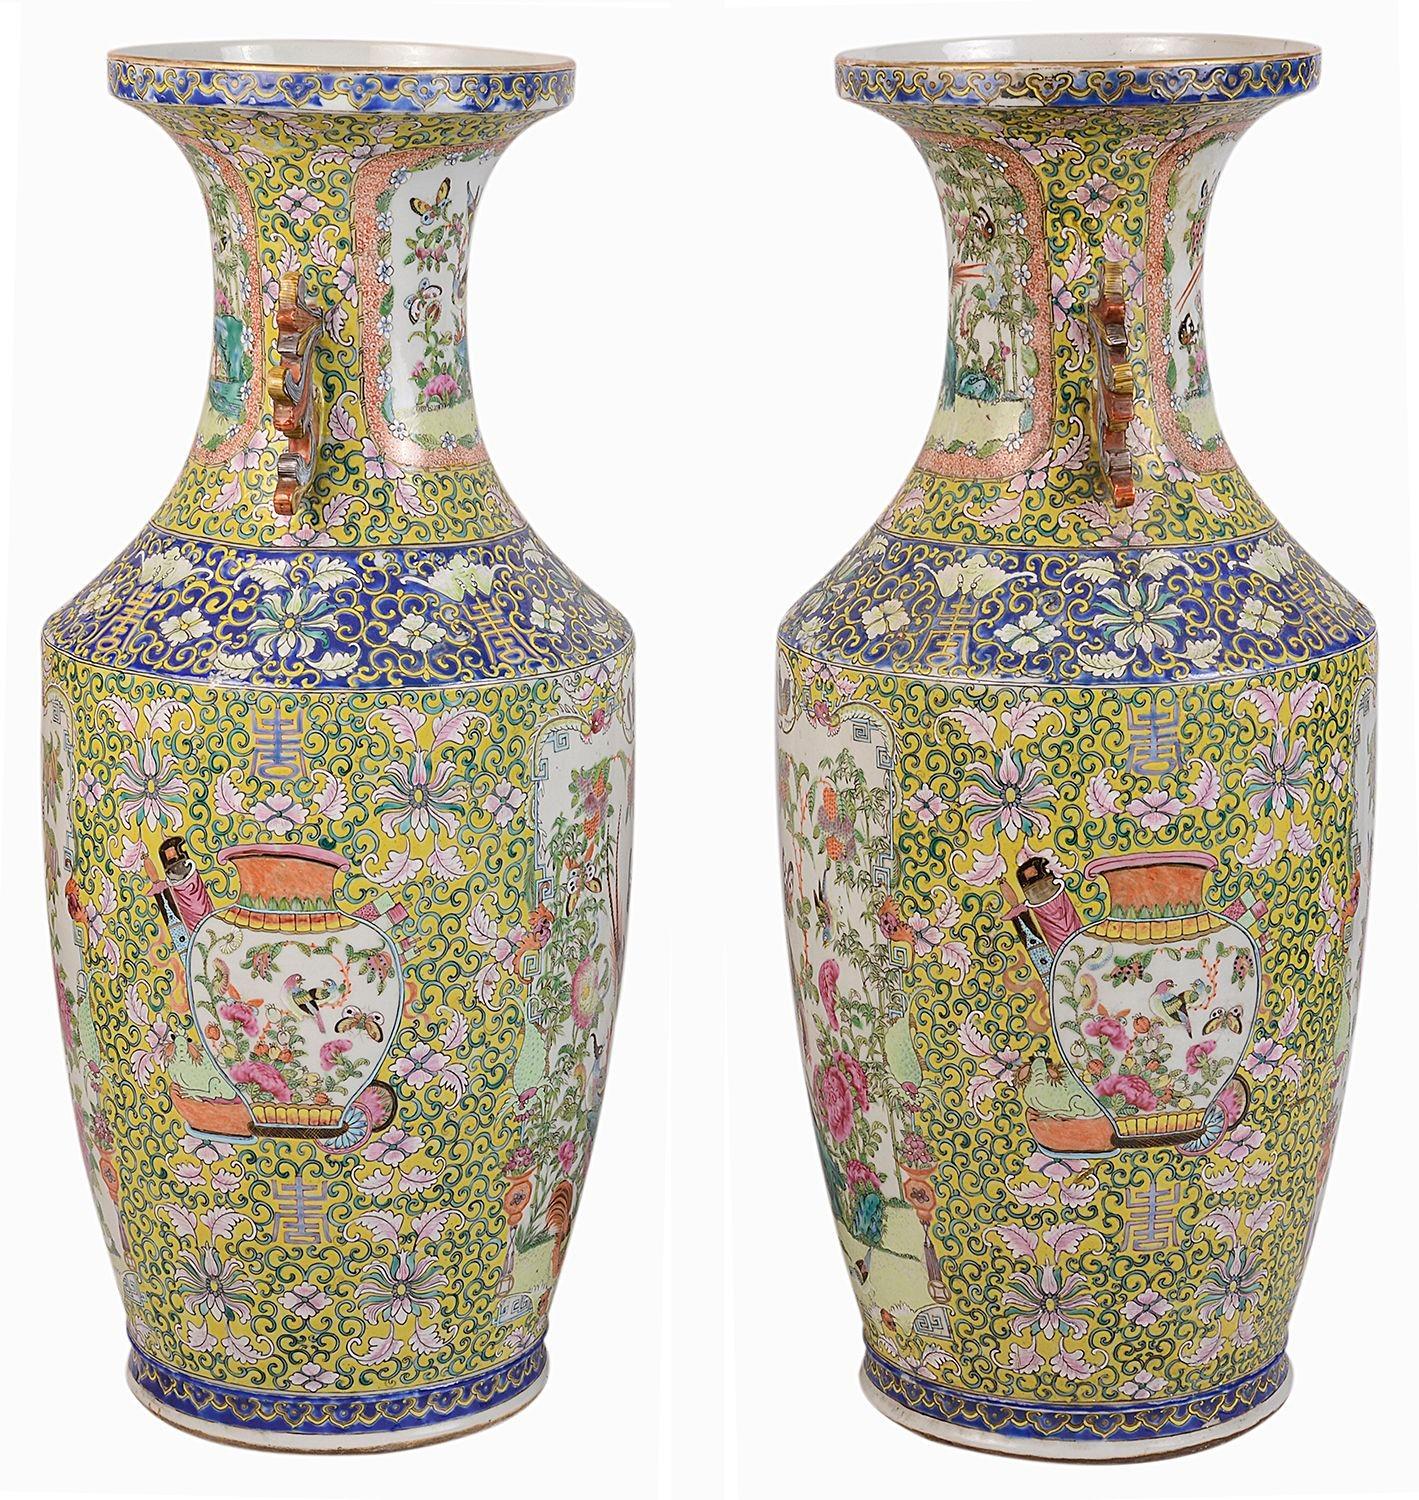 A beautiful pair of 19th century Chinese rose medallion / Cantonese vases, each with wonderful classical motif decorations in yellows, blue backgrounds. Inset hand painted panels of exotic birds, flowers and butterflies. Raised in gilded wooden